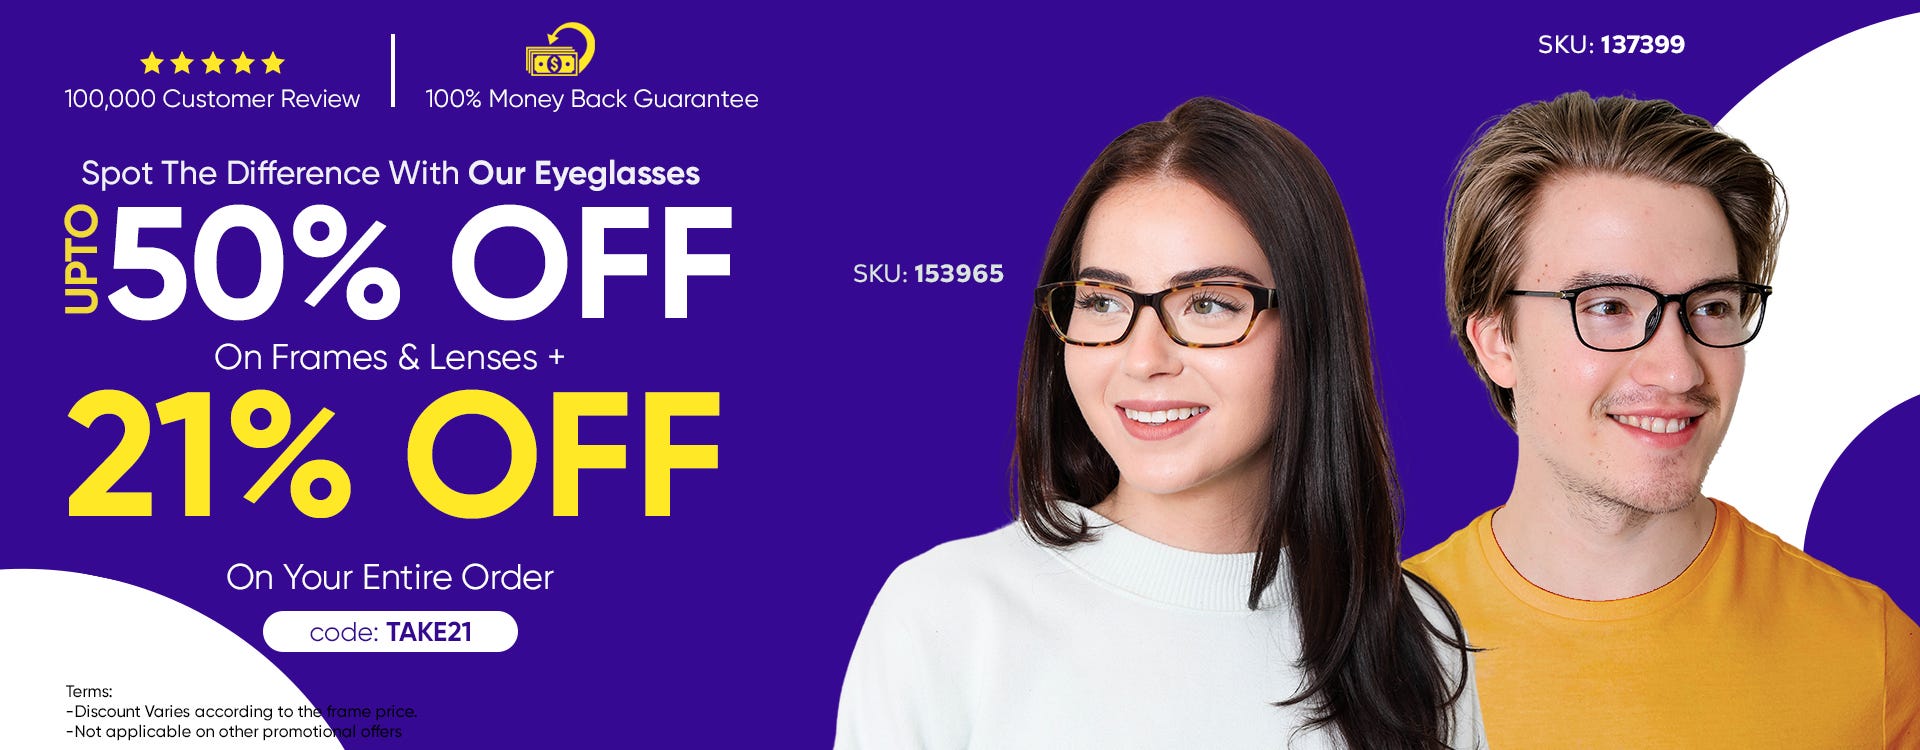 UPTO 50% Discount On All Frames Including Lenses & 21% OFF On The Entire Order CODE: TAKE21